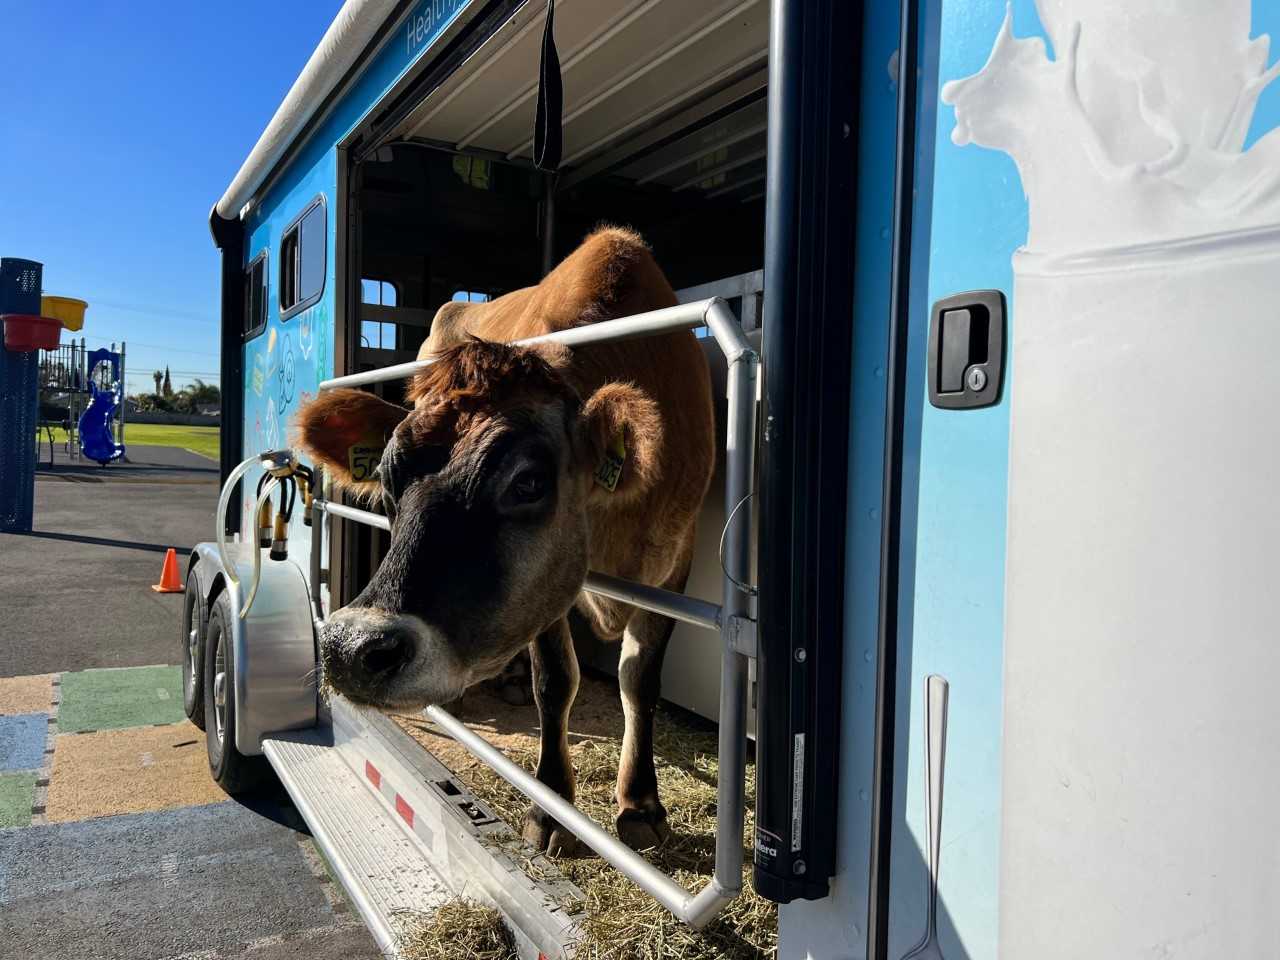 Cinnamon the Cow Visits Lawrence Elementary